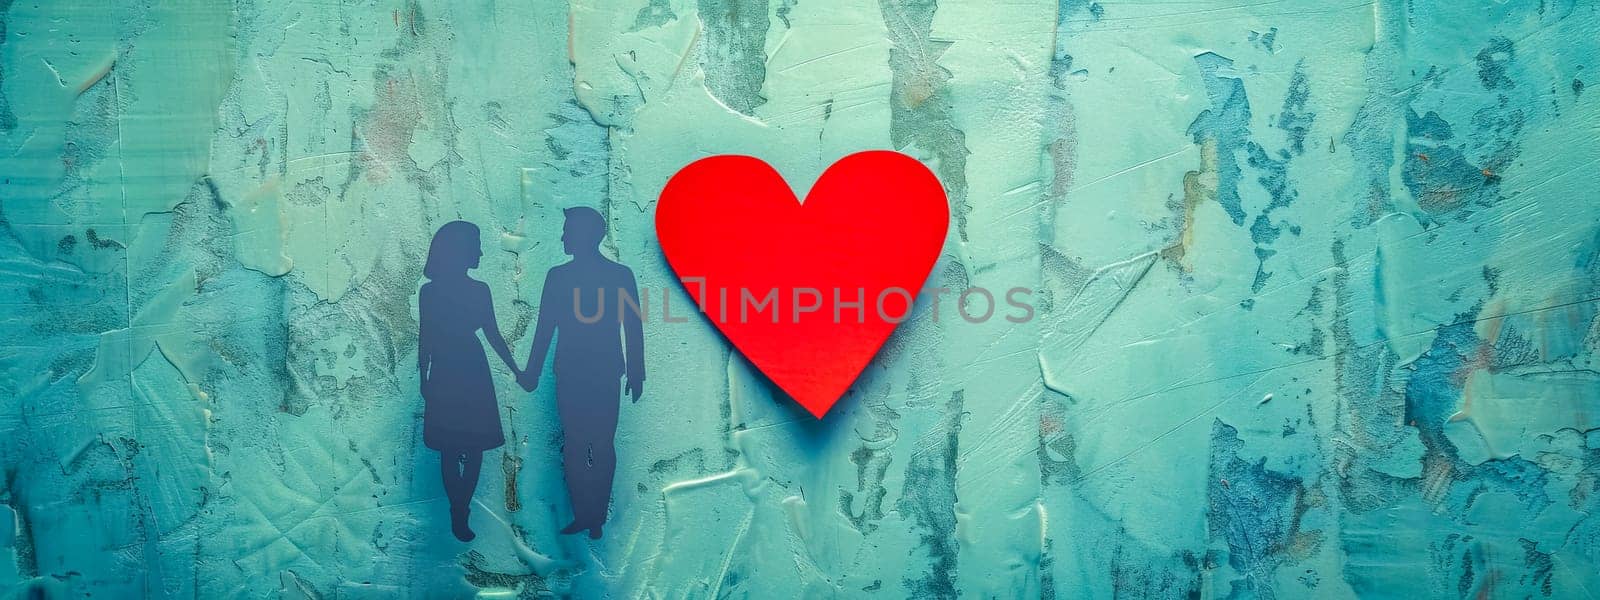 Silhouetted couple holding hands with a vibrant red heart on a grungy blue backdrop